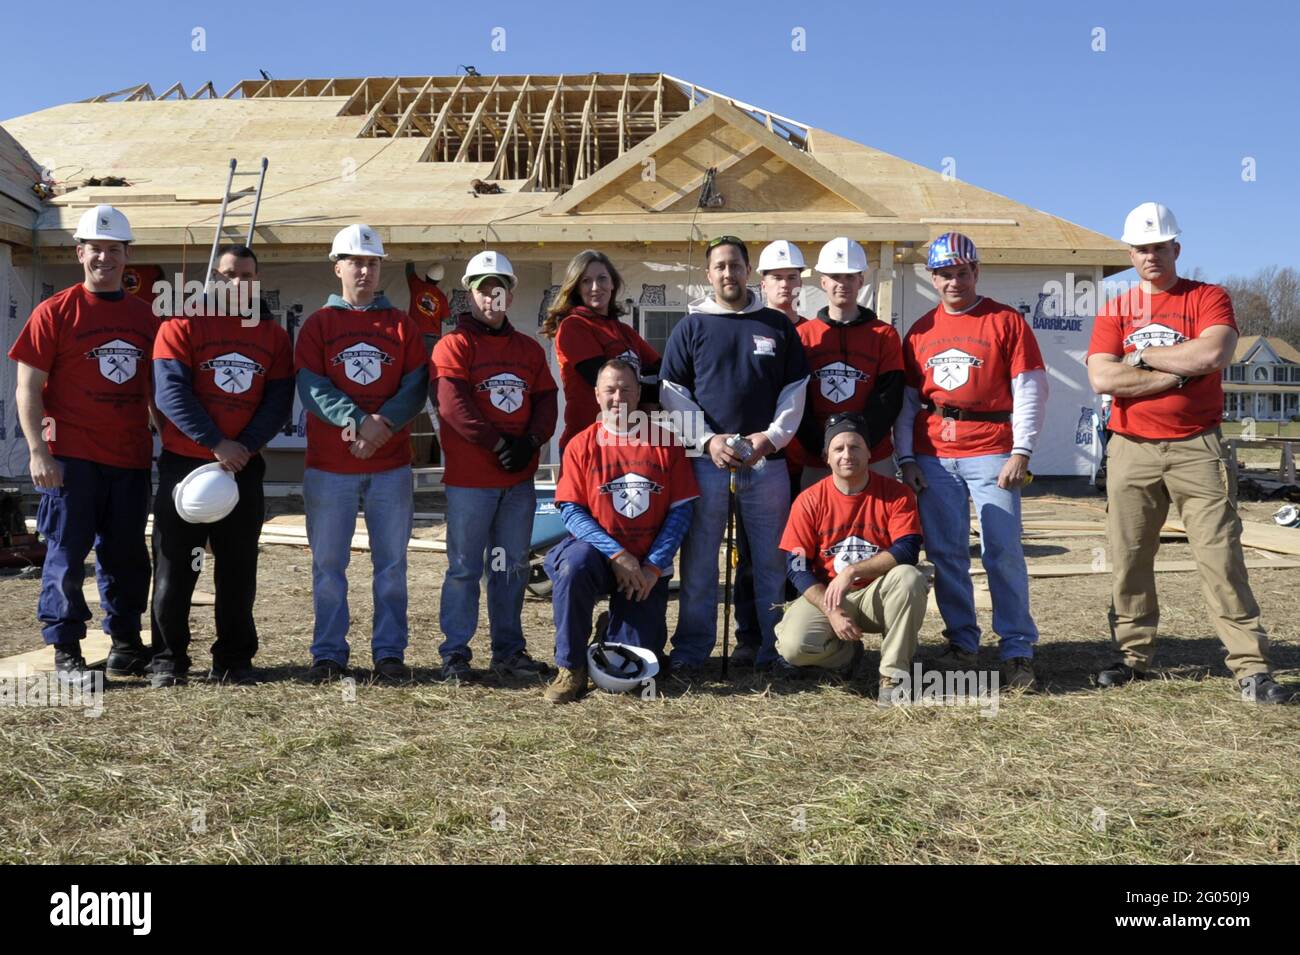 Reportage:   QUEEN ANNE, Md. - Members from Coast Guard Sector Baltimore pose with Marine Sgt. Christopher Santiago (in blue shirt) during a Homes for Our Troops Build Brigade, Nov. 17, 2012. An estimated 150 volunteers from the community, including members of the Coast Guard, spent two days constructing the specially adapted home for Santiago, who lost both of his legs and severely injured his left arm when he stepped on an improvised explosive device while deployed to Iraq in 2006. Stock Photo